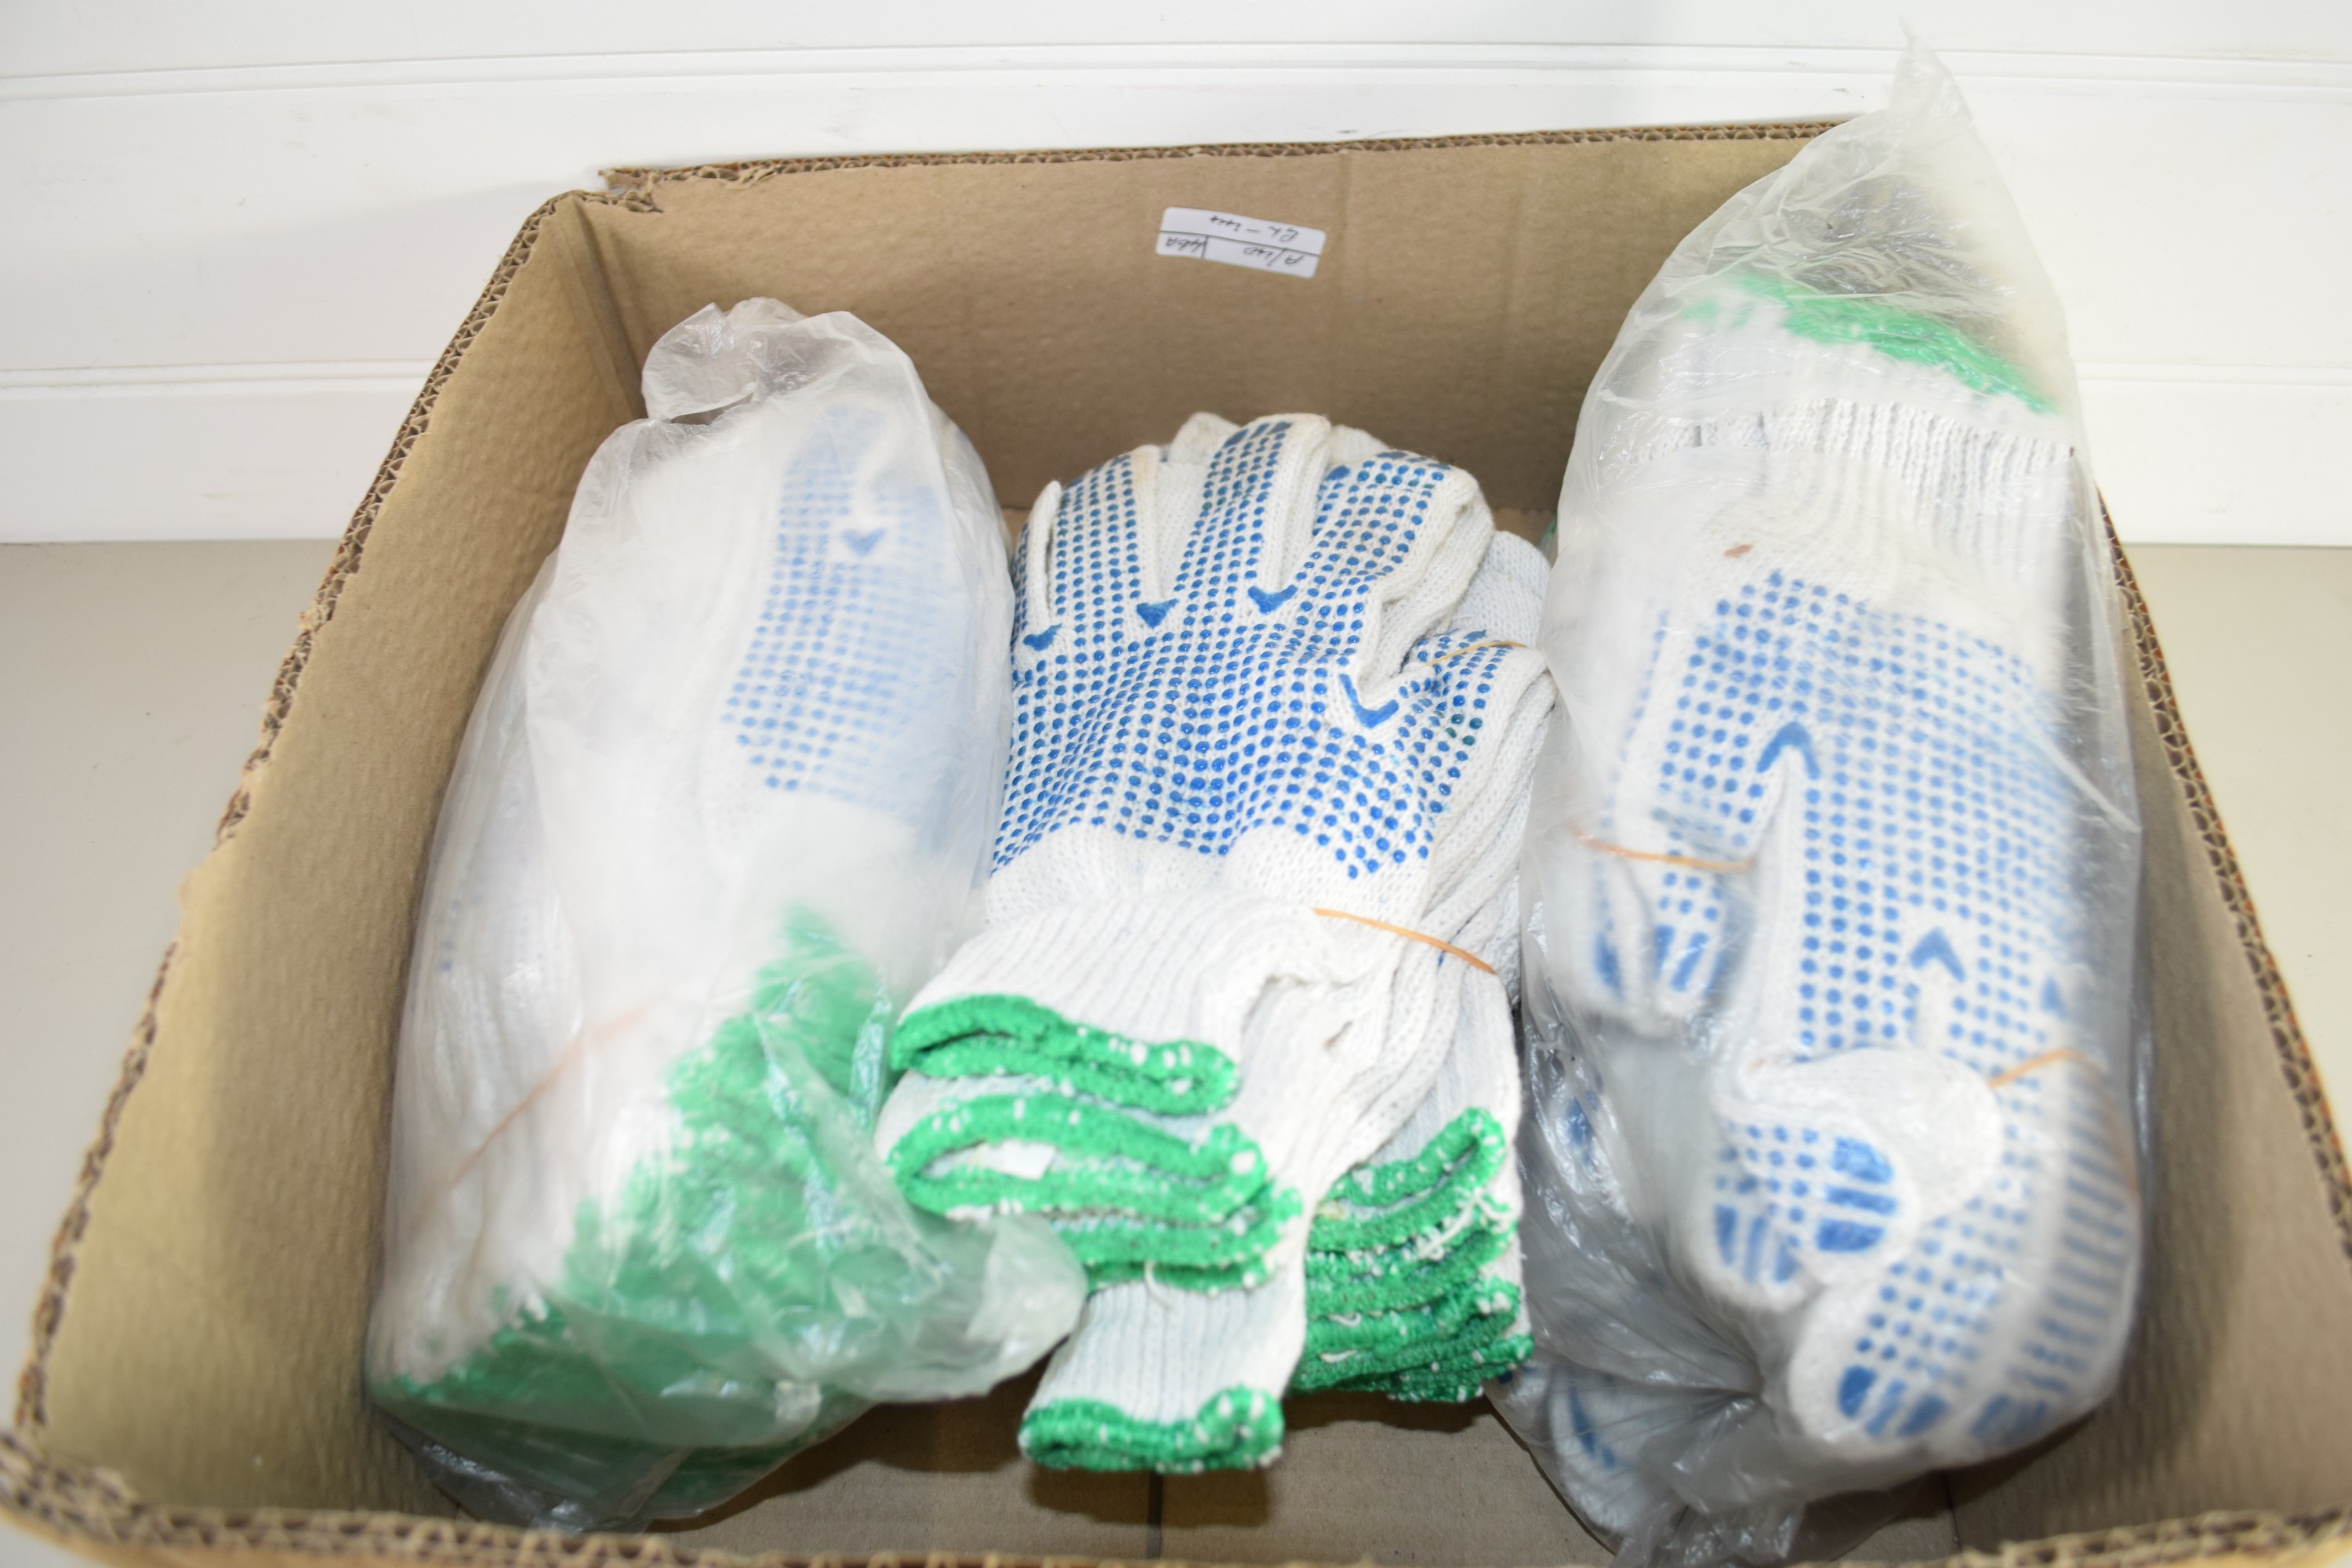 BOX CONTAINING COTTON GLOVES